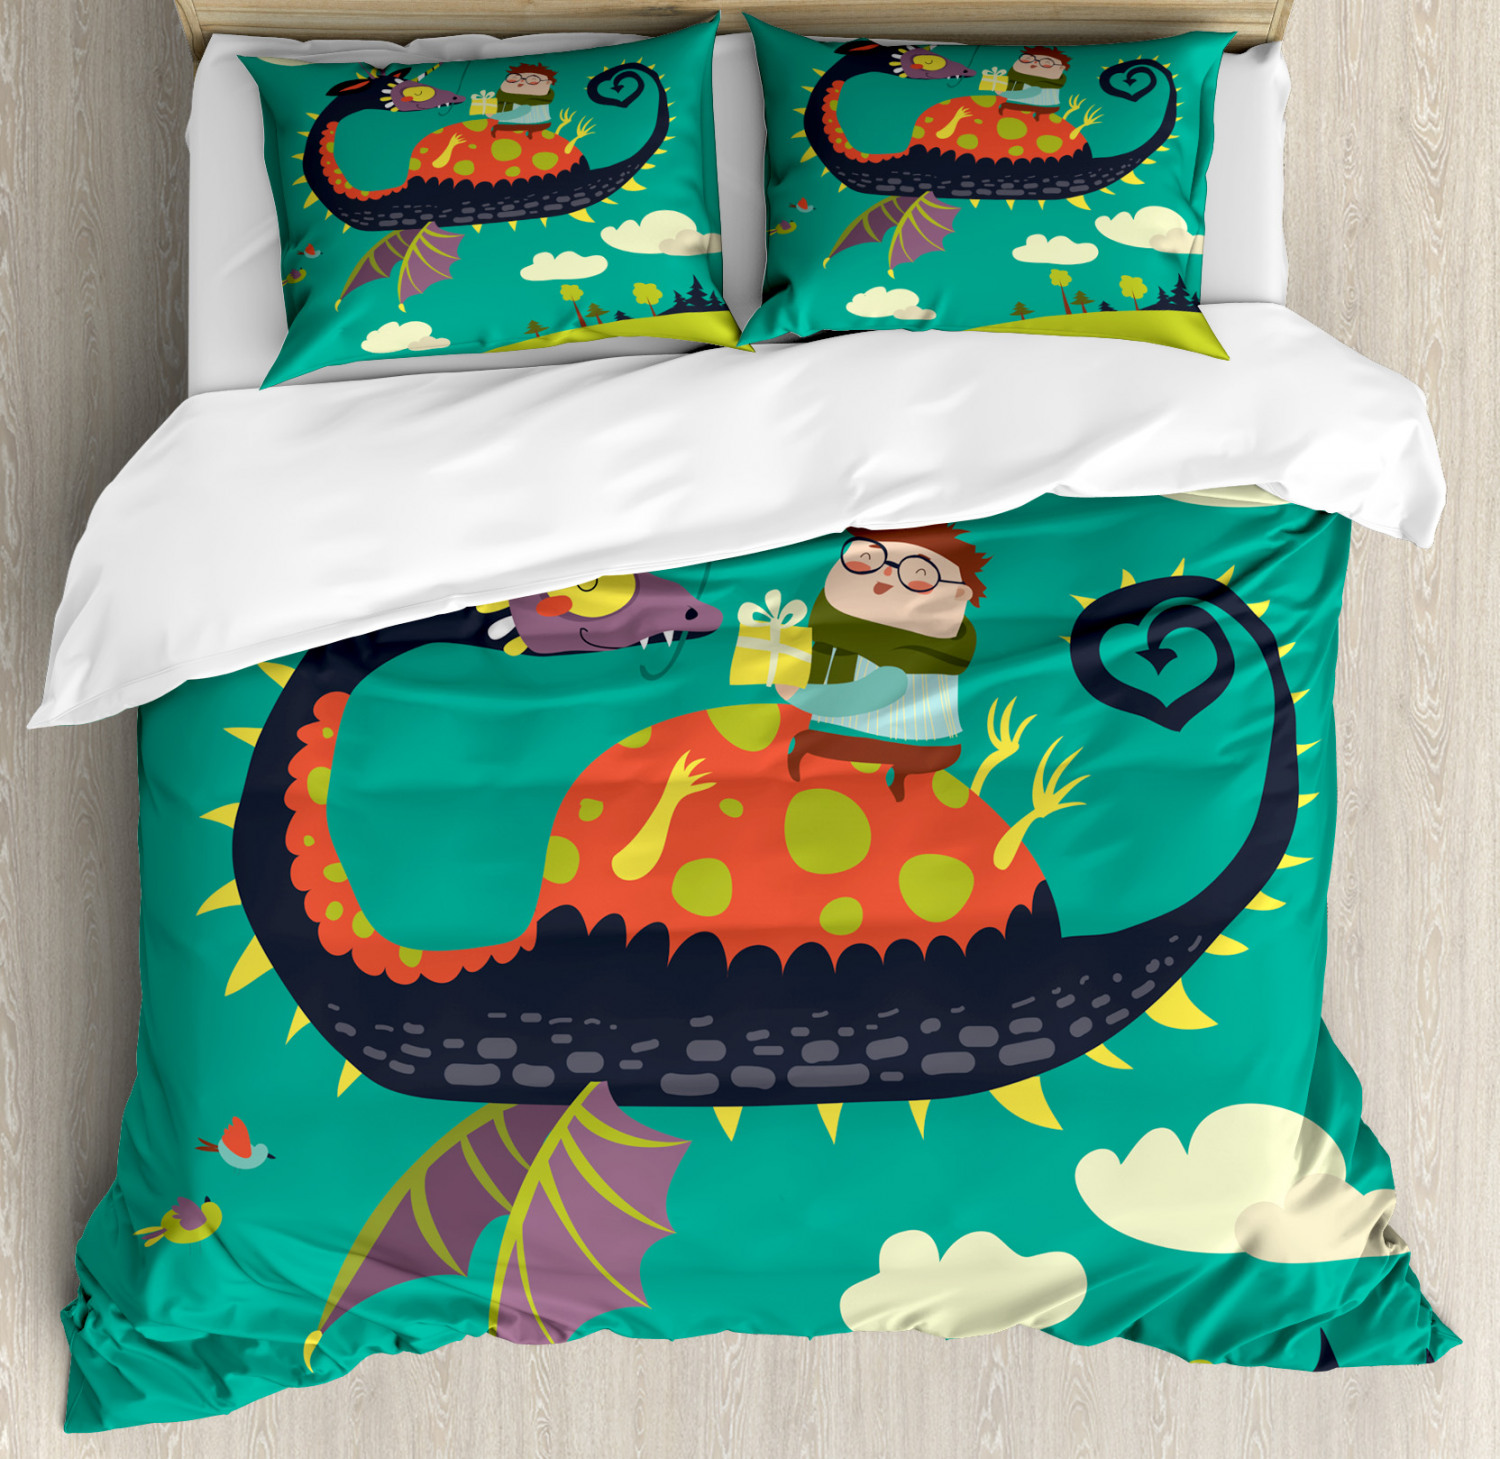 Kids Boys Queen Size Duvet Cover Set, Fantasy Theme Little Boy Riding a Dragon with Heart Shaped Tail over the Hills, Decorative 3 Piece Bedding Set with 2 Pillow Shams, Multicolor, by Ambesonne - image 1 of 3